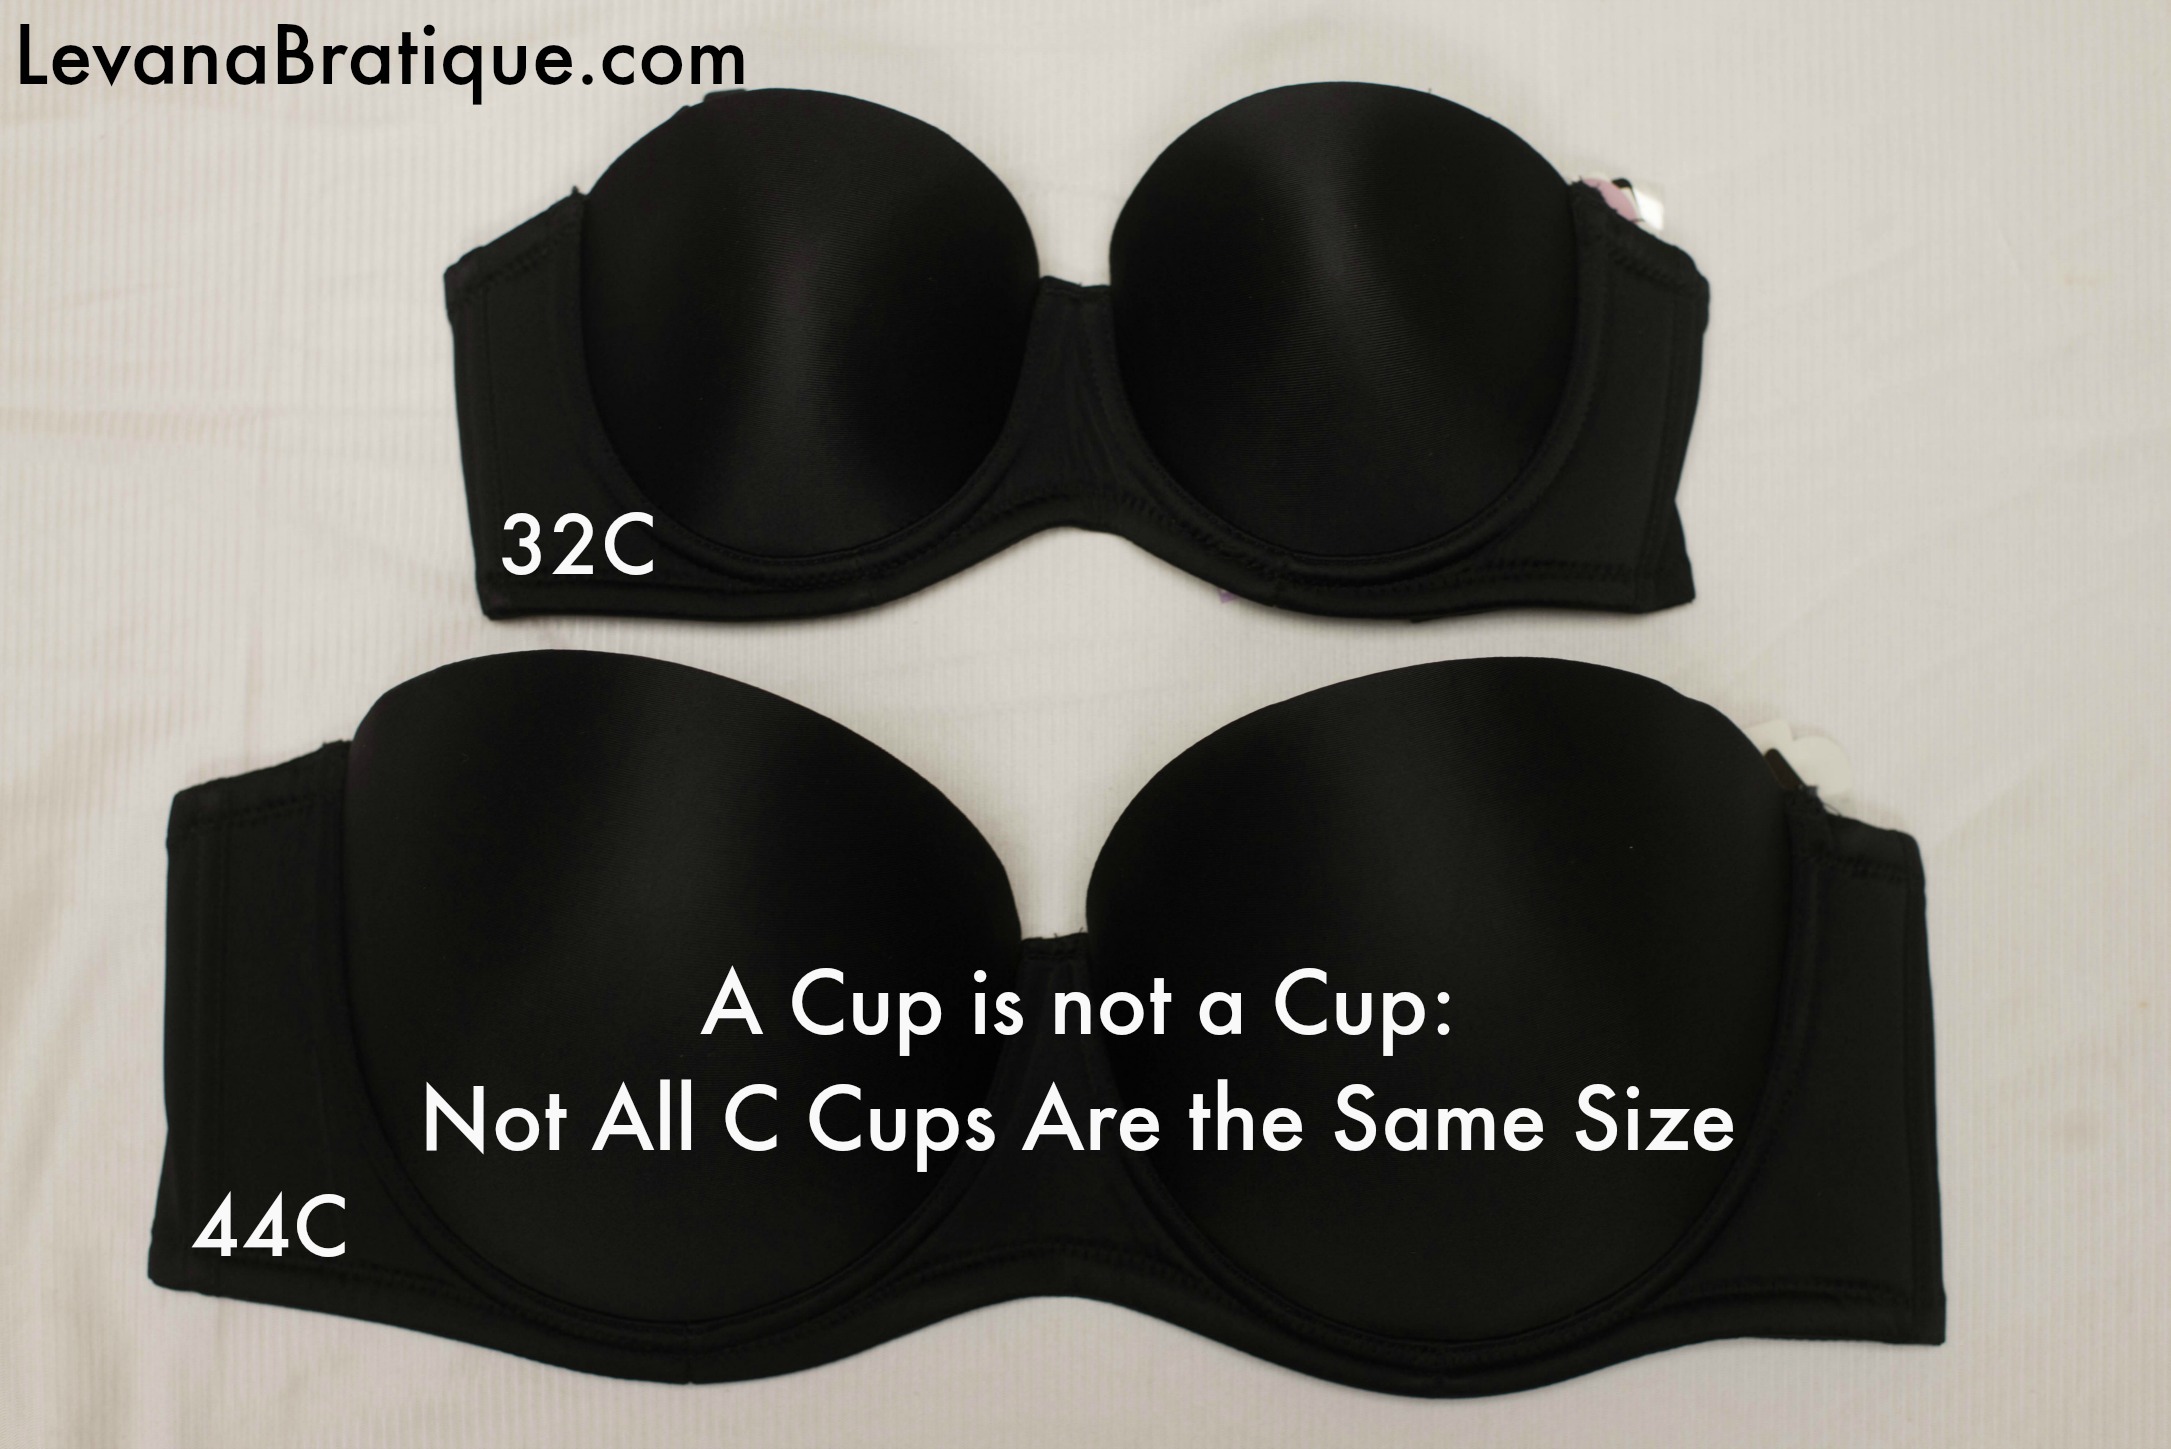 A Cup is Not a Cup, Levana Bratique